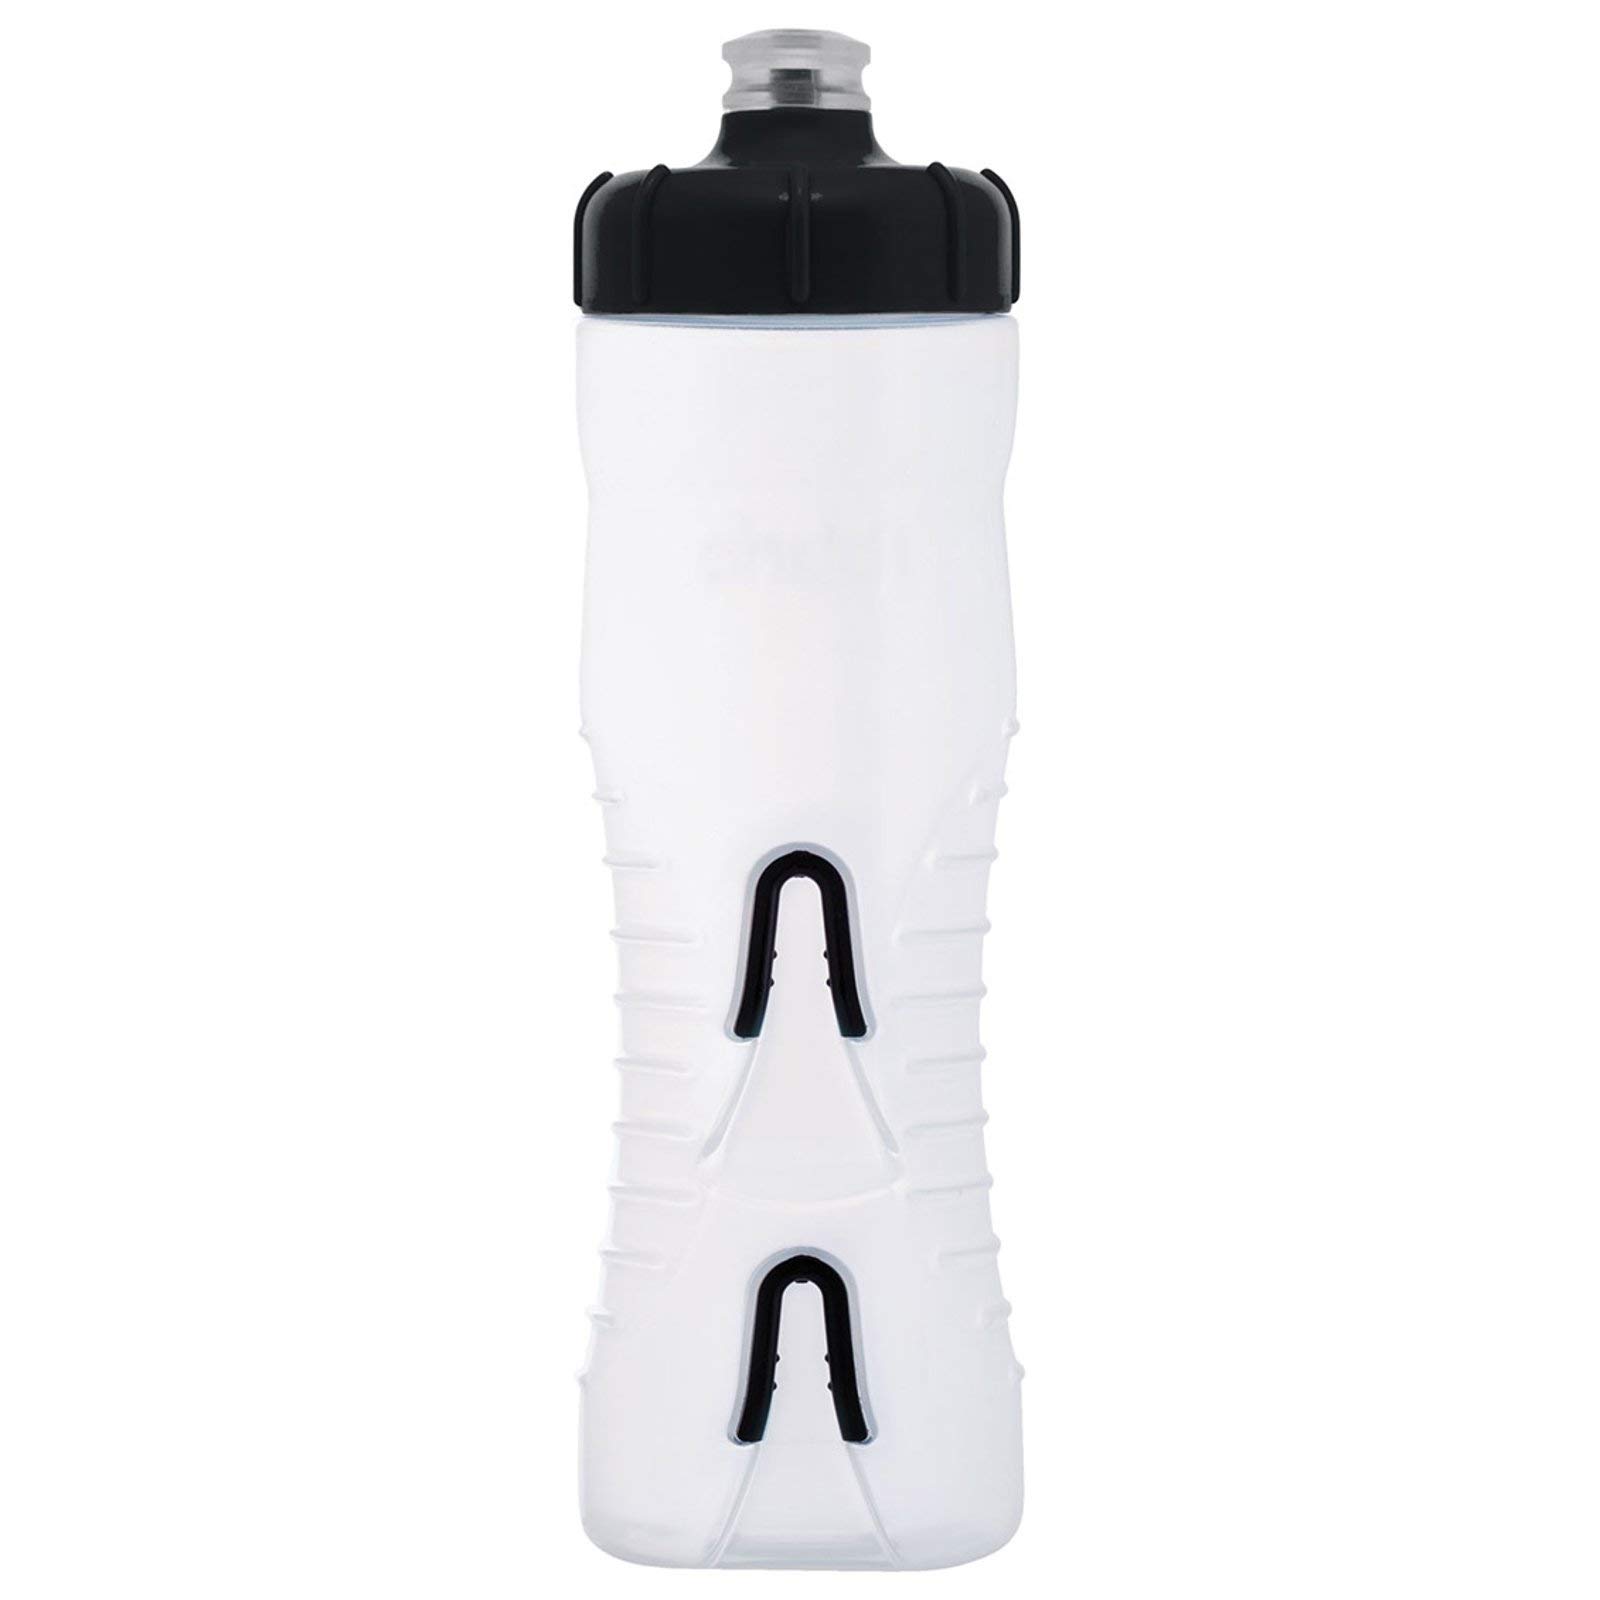 Fabric Cageless Water Bottle, 750ml, Clear/Black